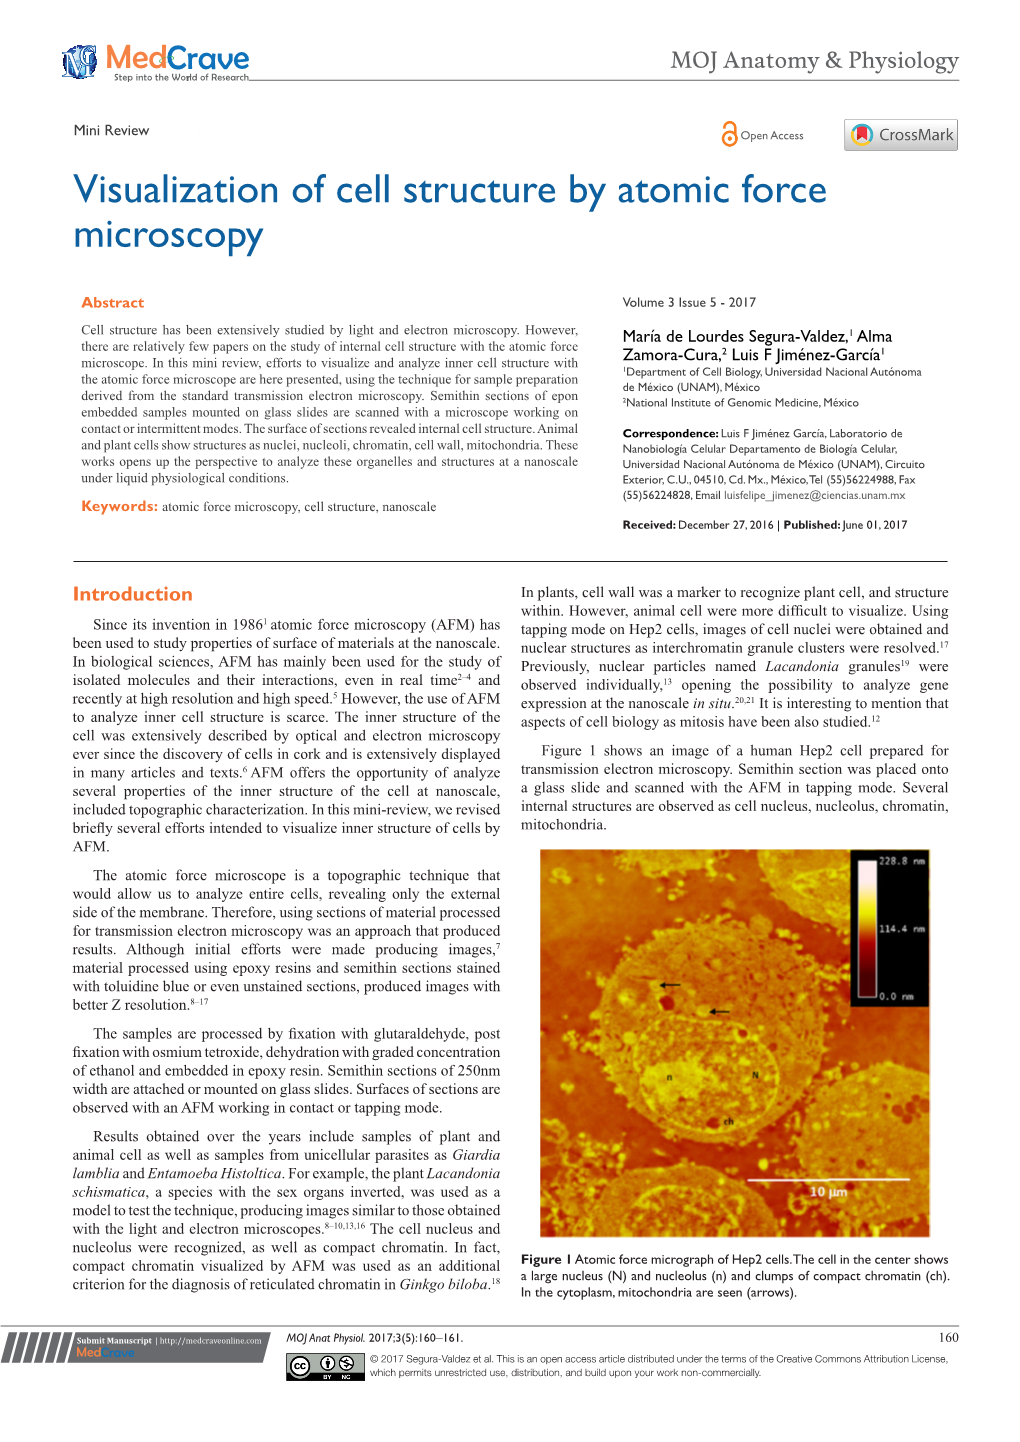 Visualization of Cell Structure by Atomic Force Microscopy